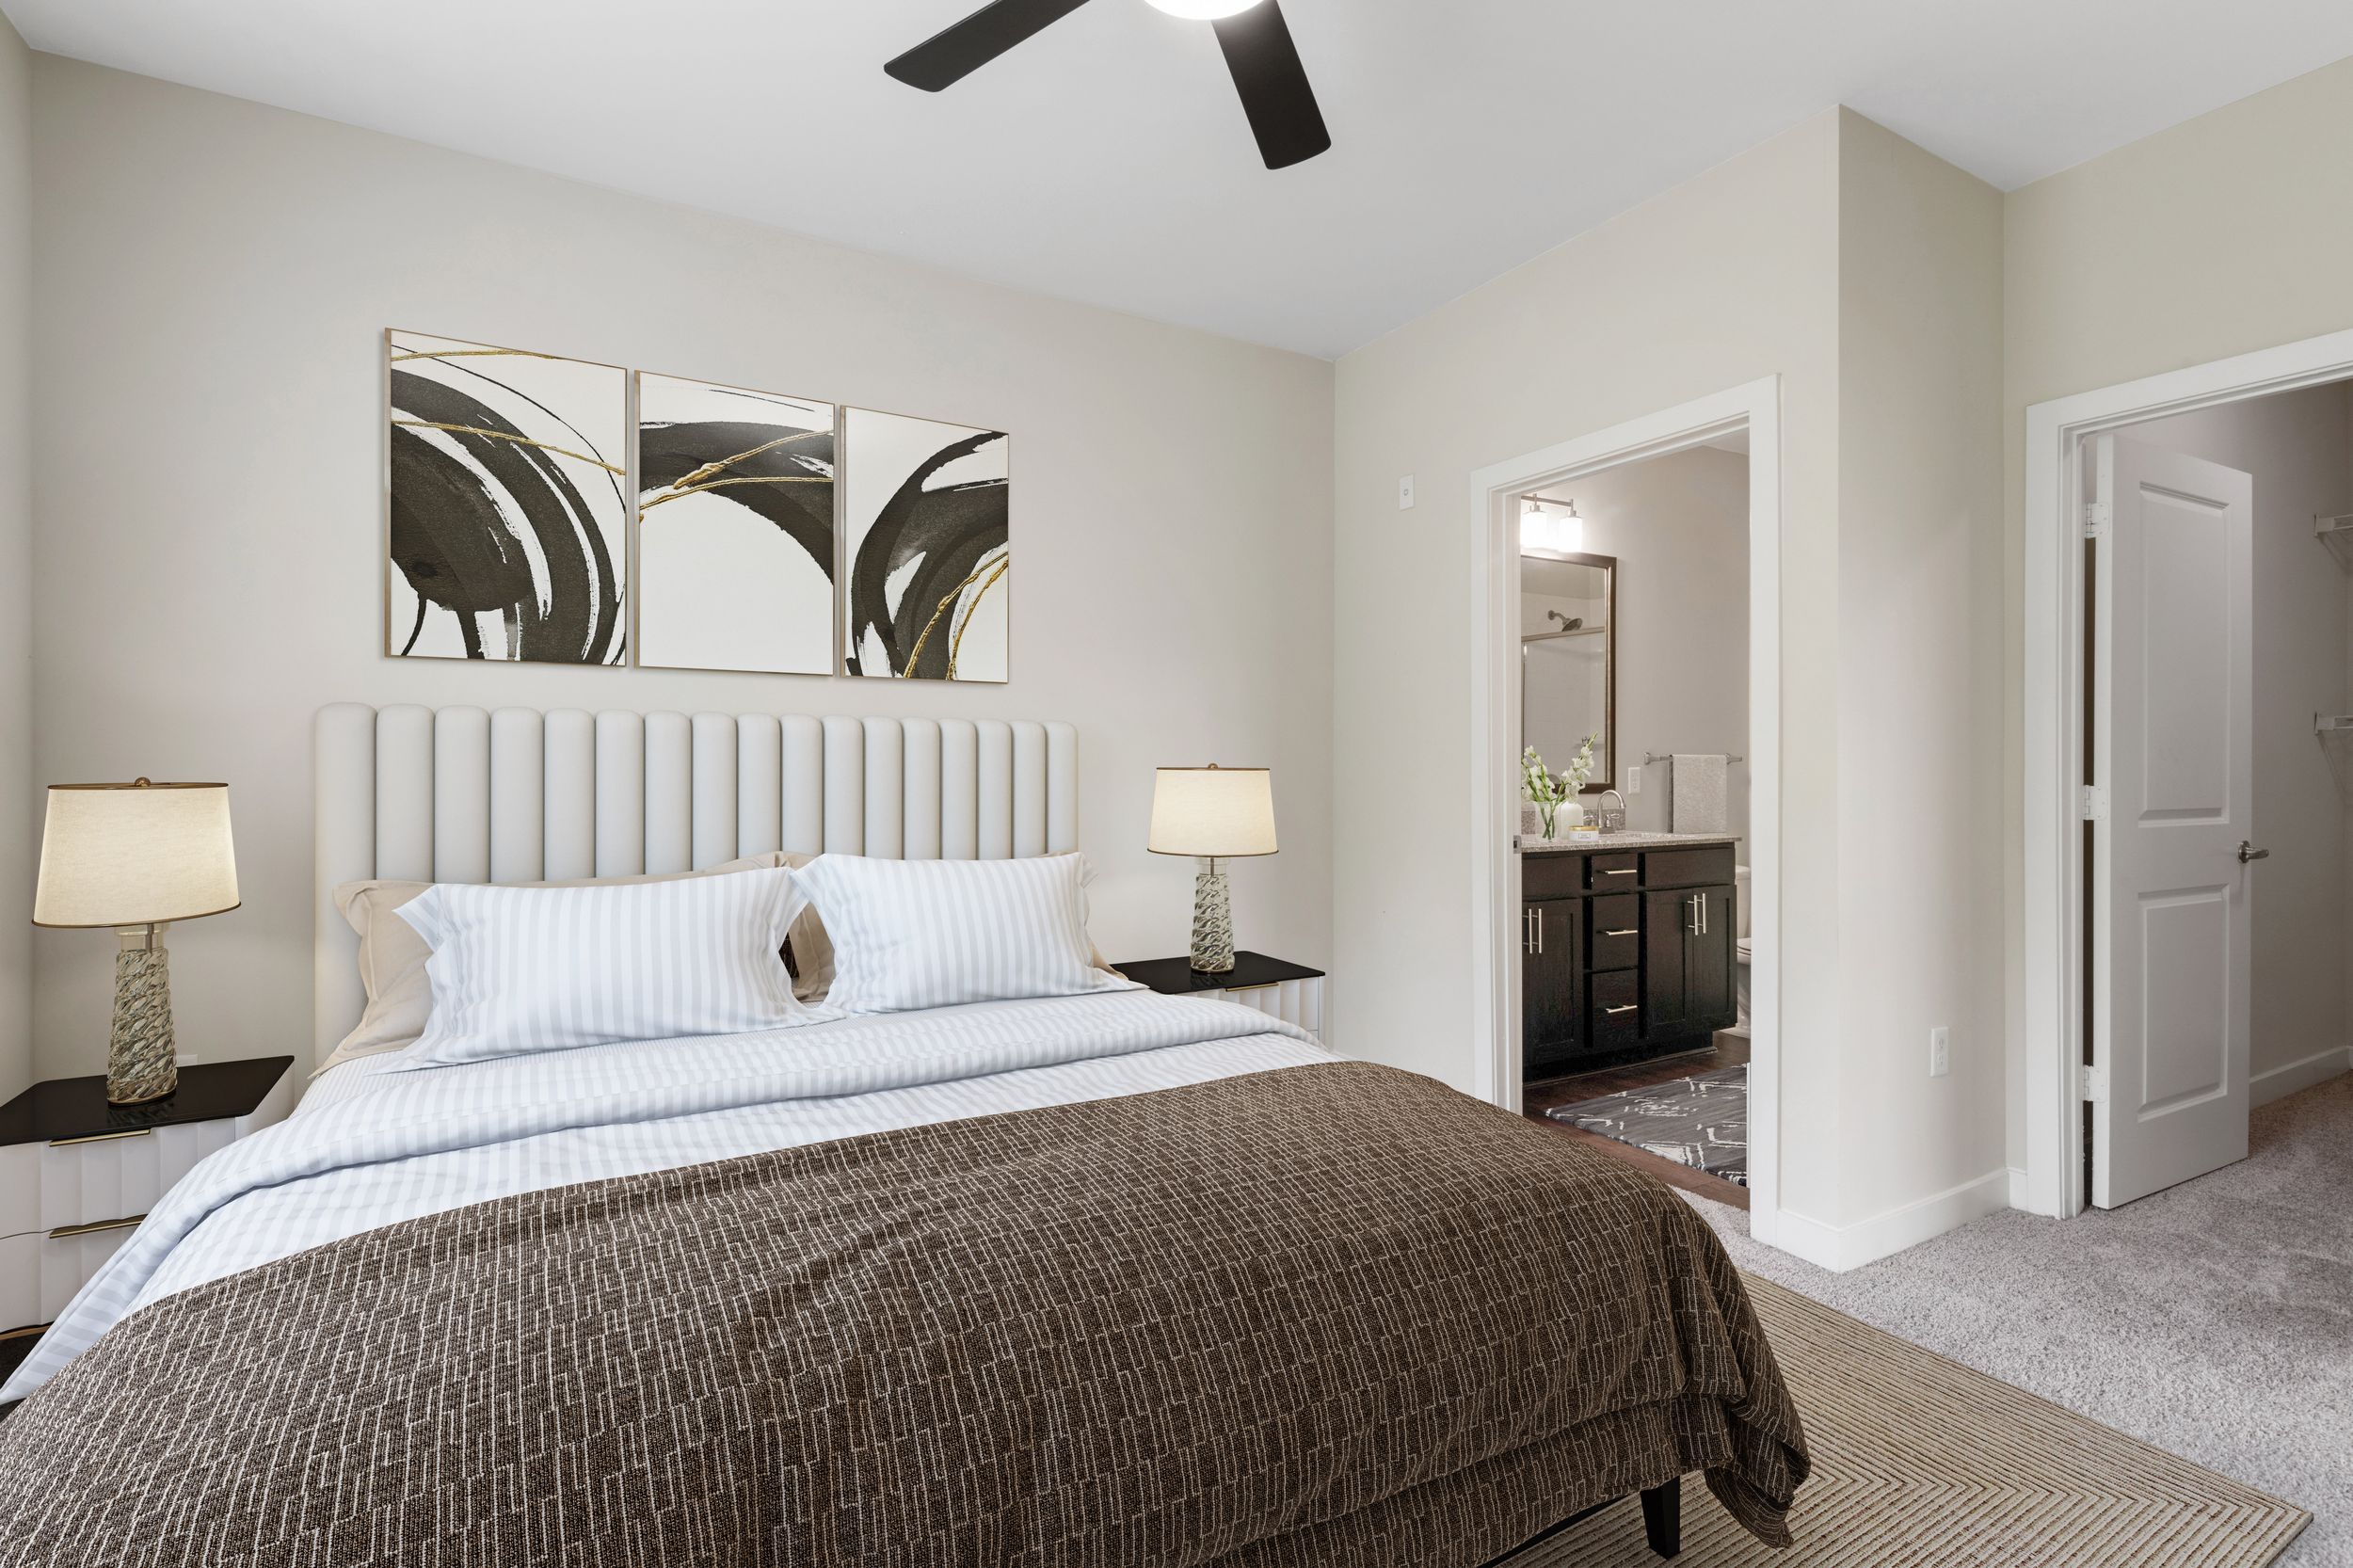 Master bedroom with plush carpet, modern ceiling fan, spacious walk-in closet, and en suite bathroom at Realm at Patterson Place by Lantower Residential.